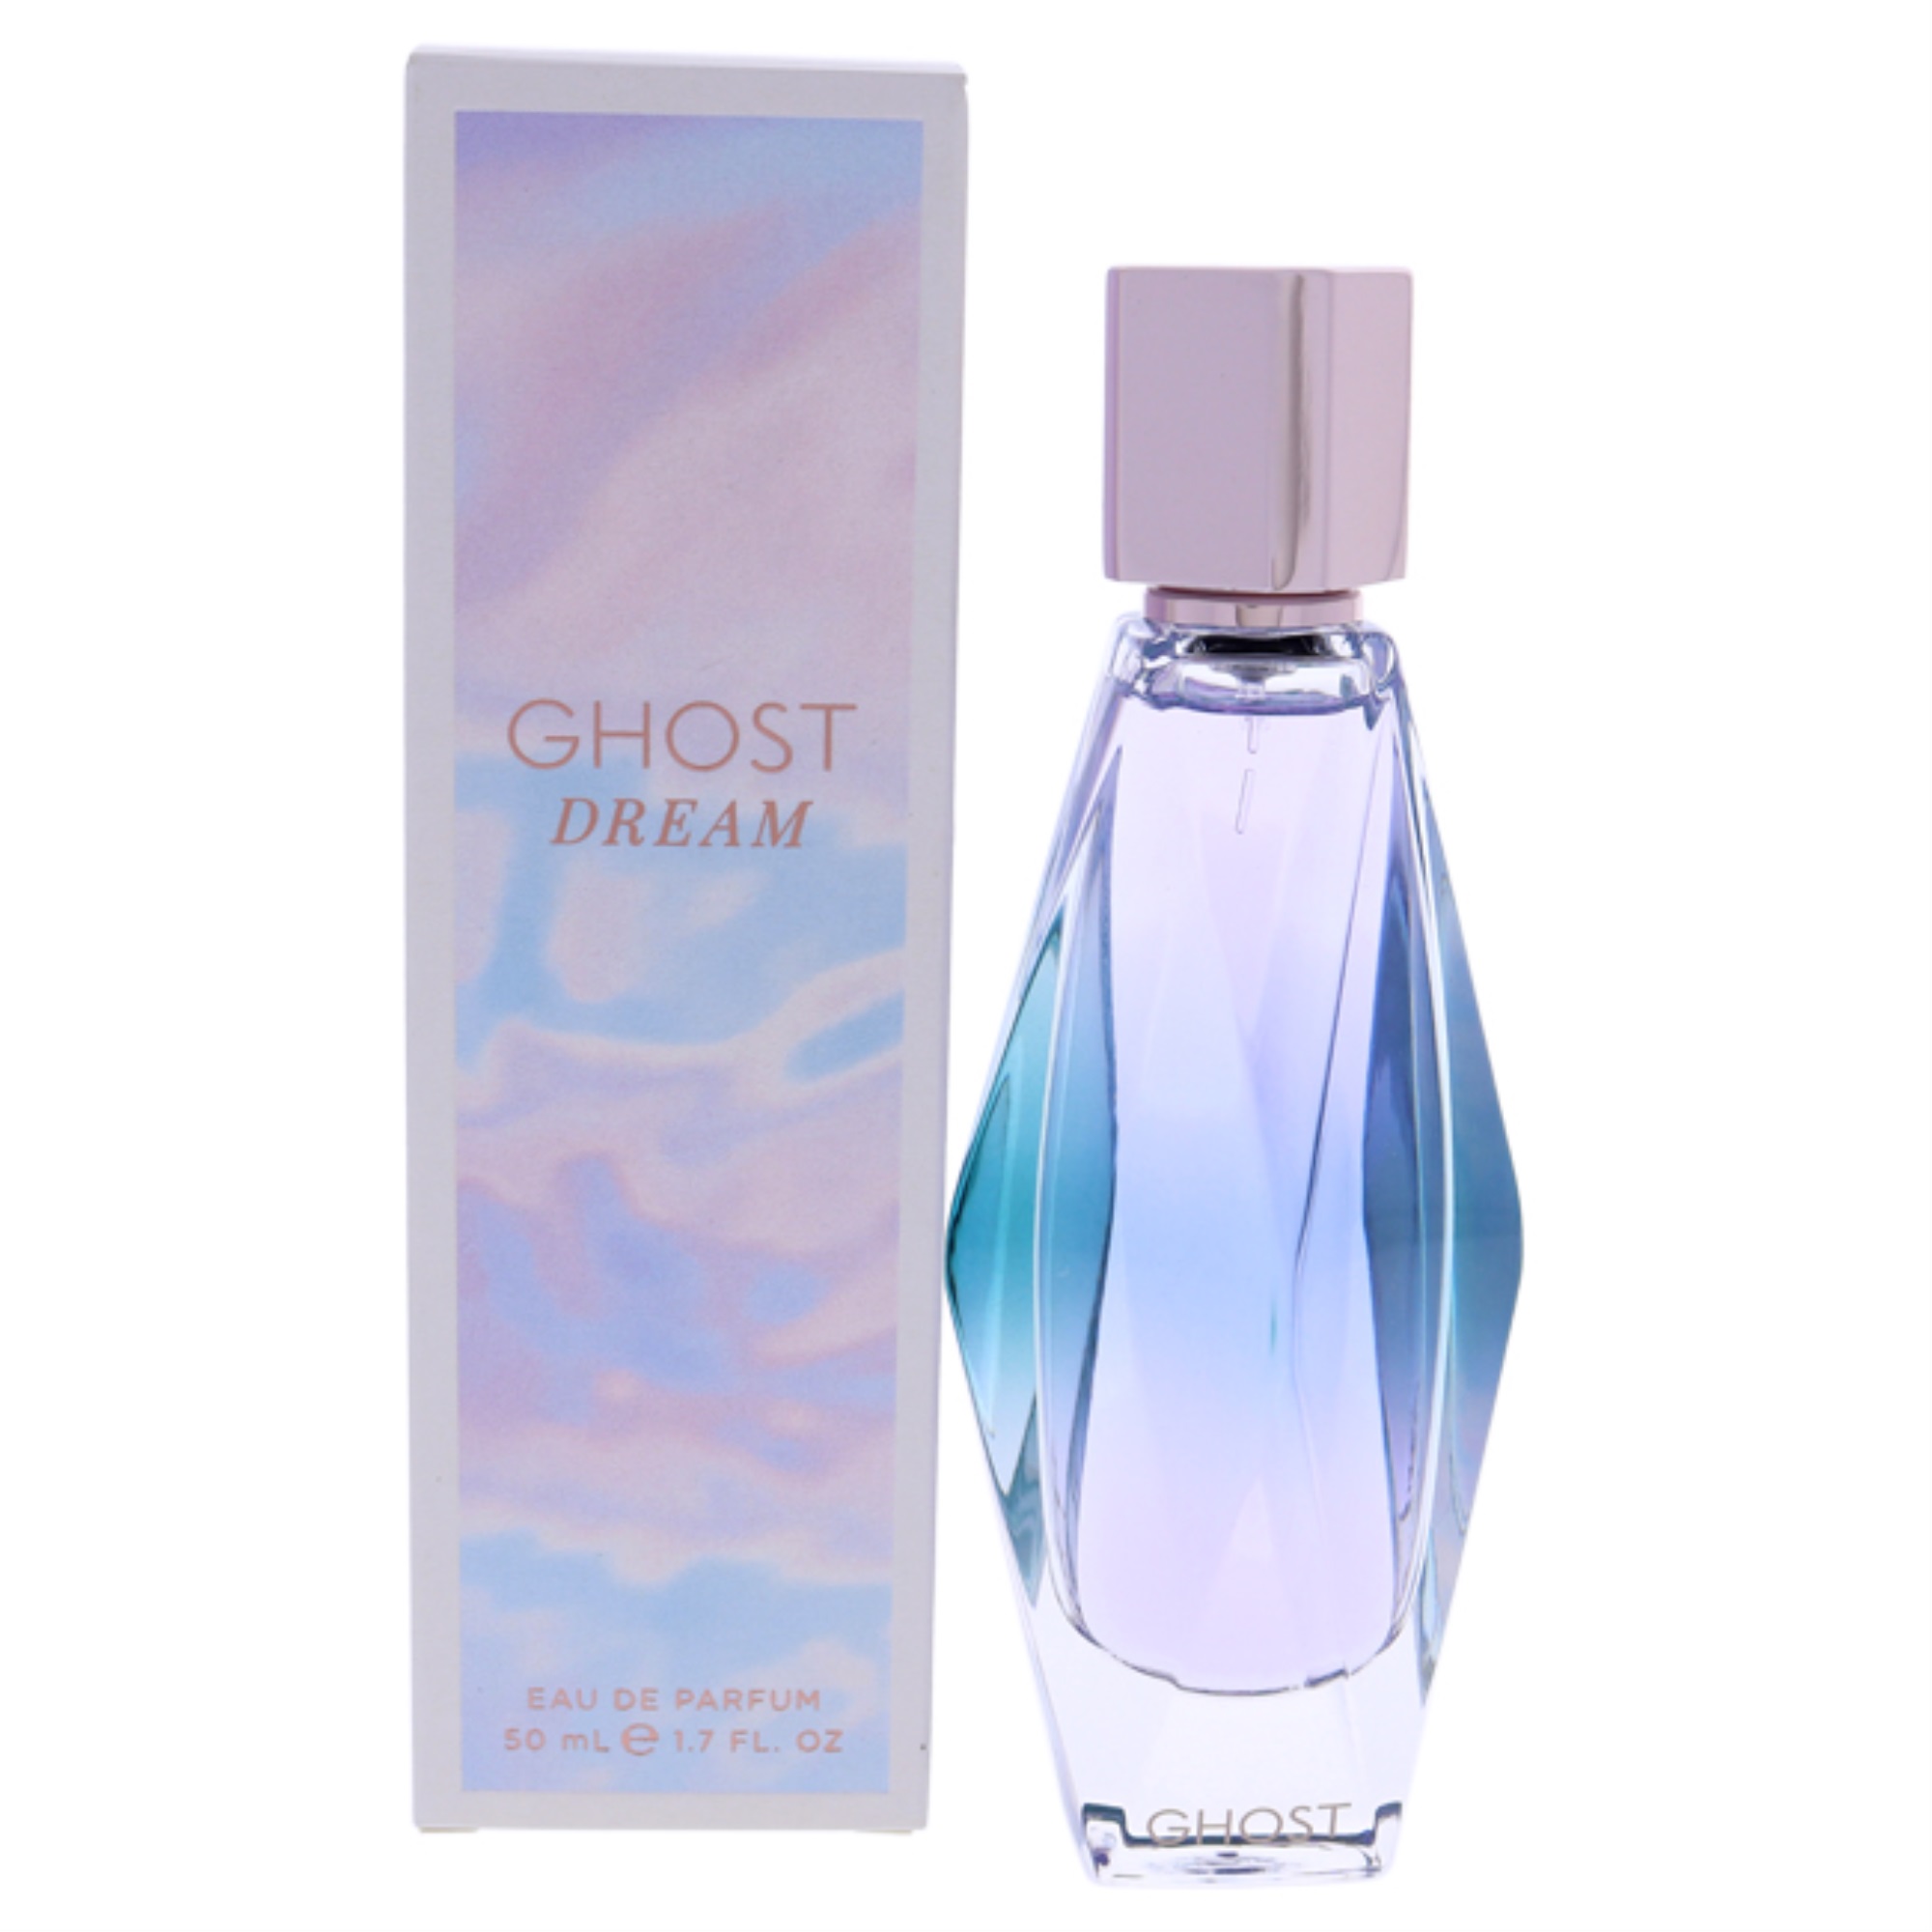 Ghost Dream by Ghost for Women - 1.7 oz EDP Spray